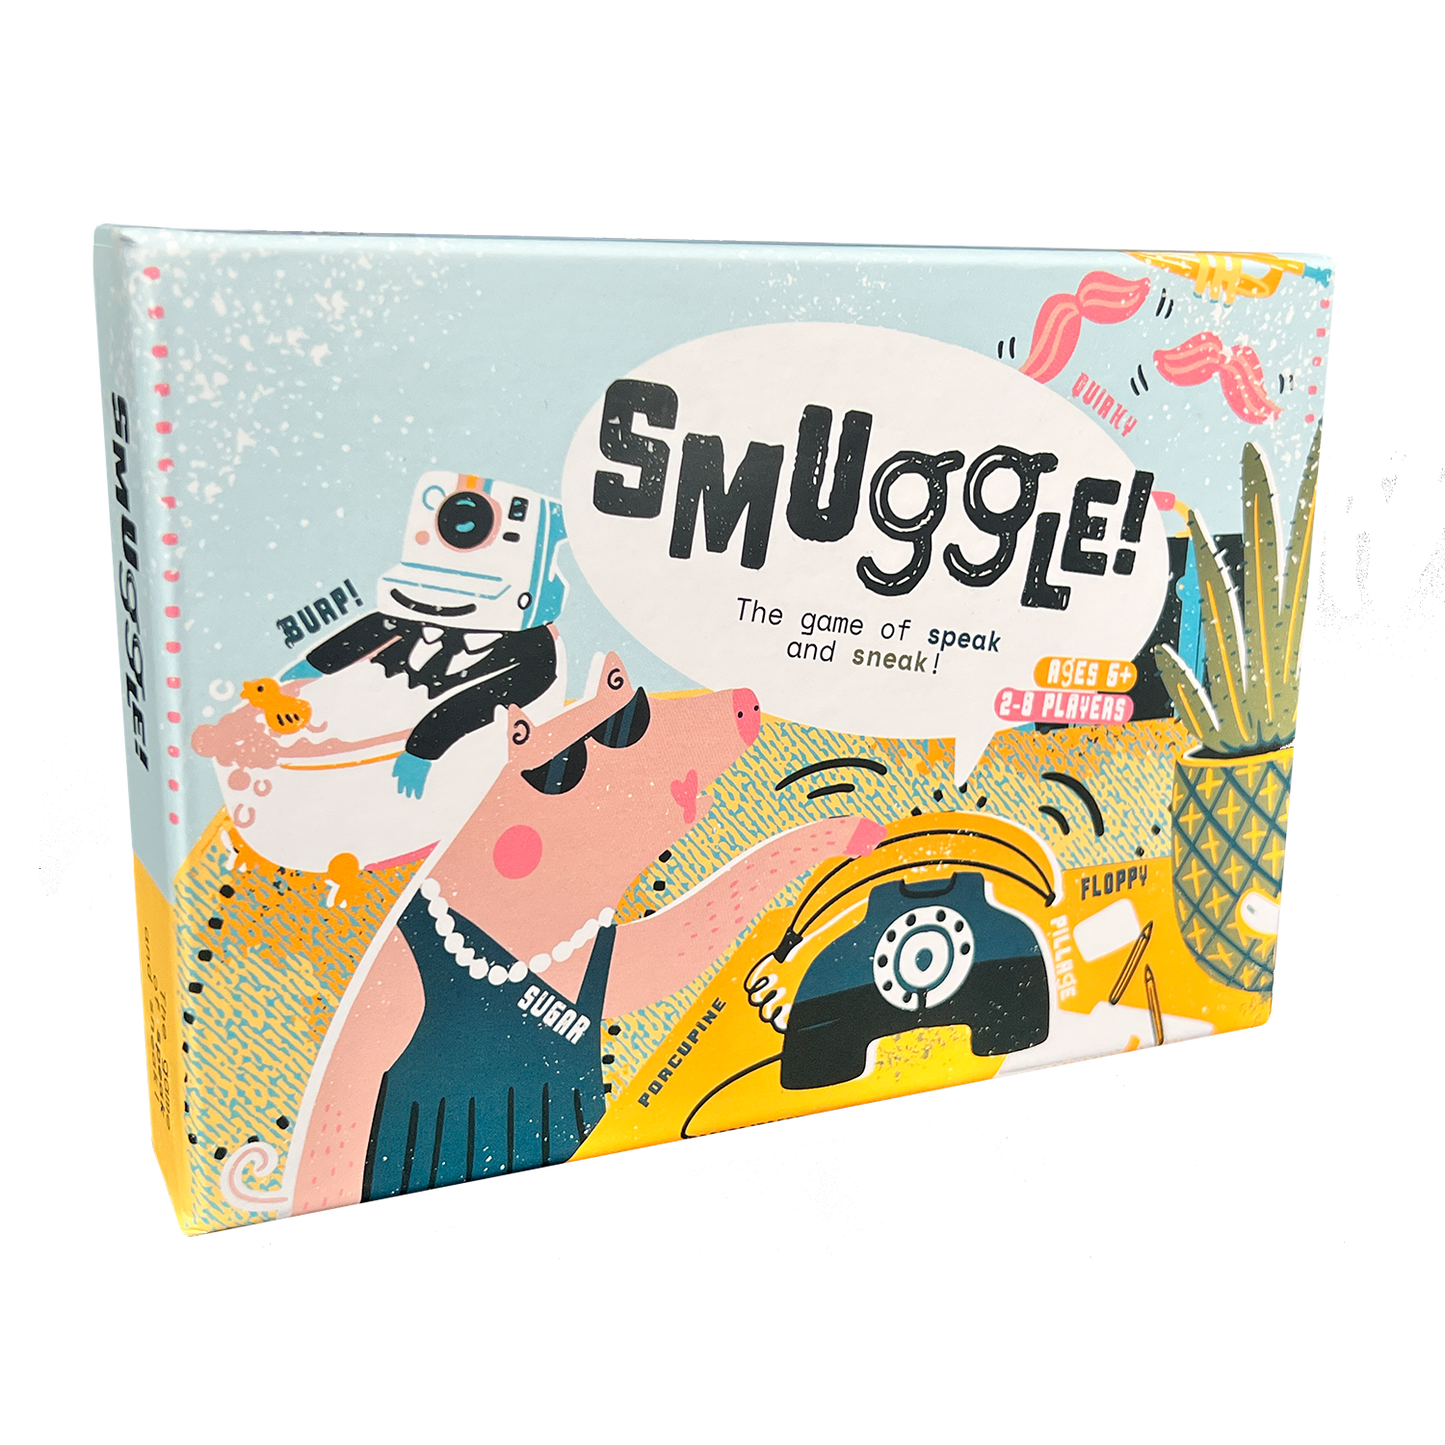 Smuggle - The Game of Speak and Sneak